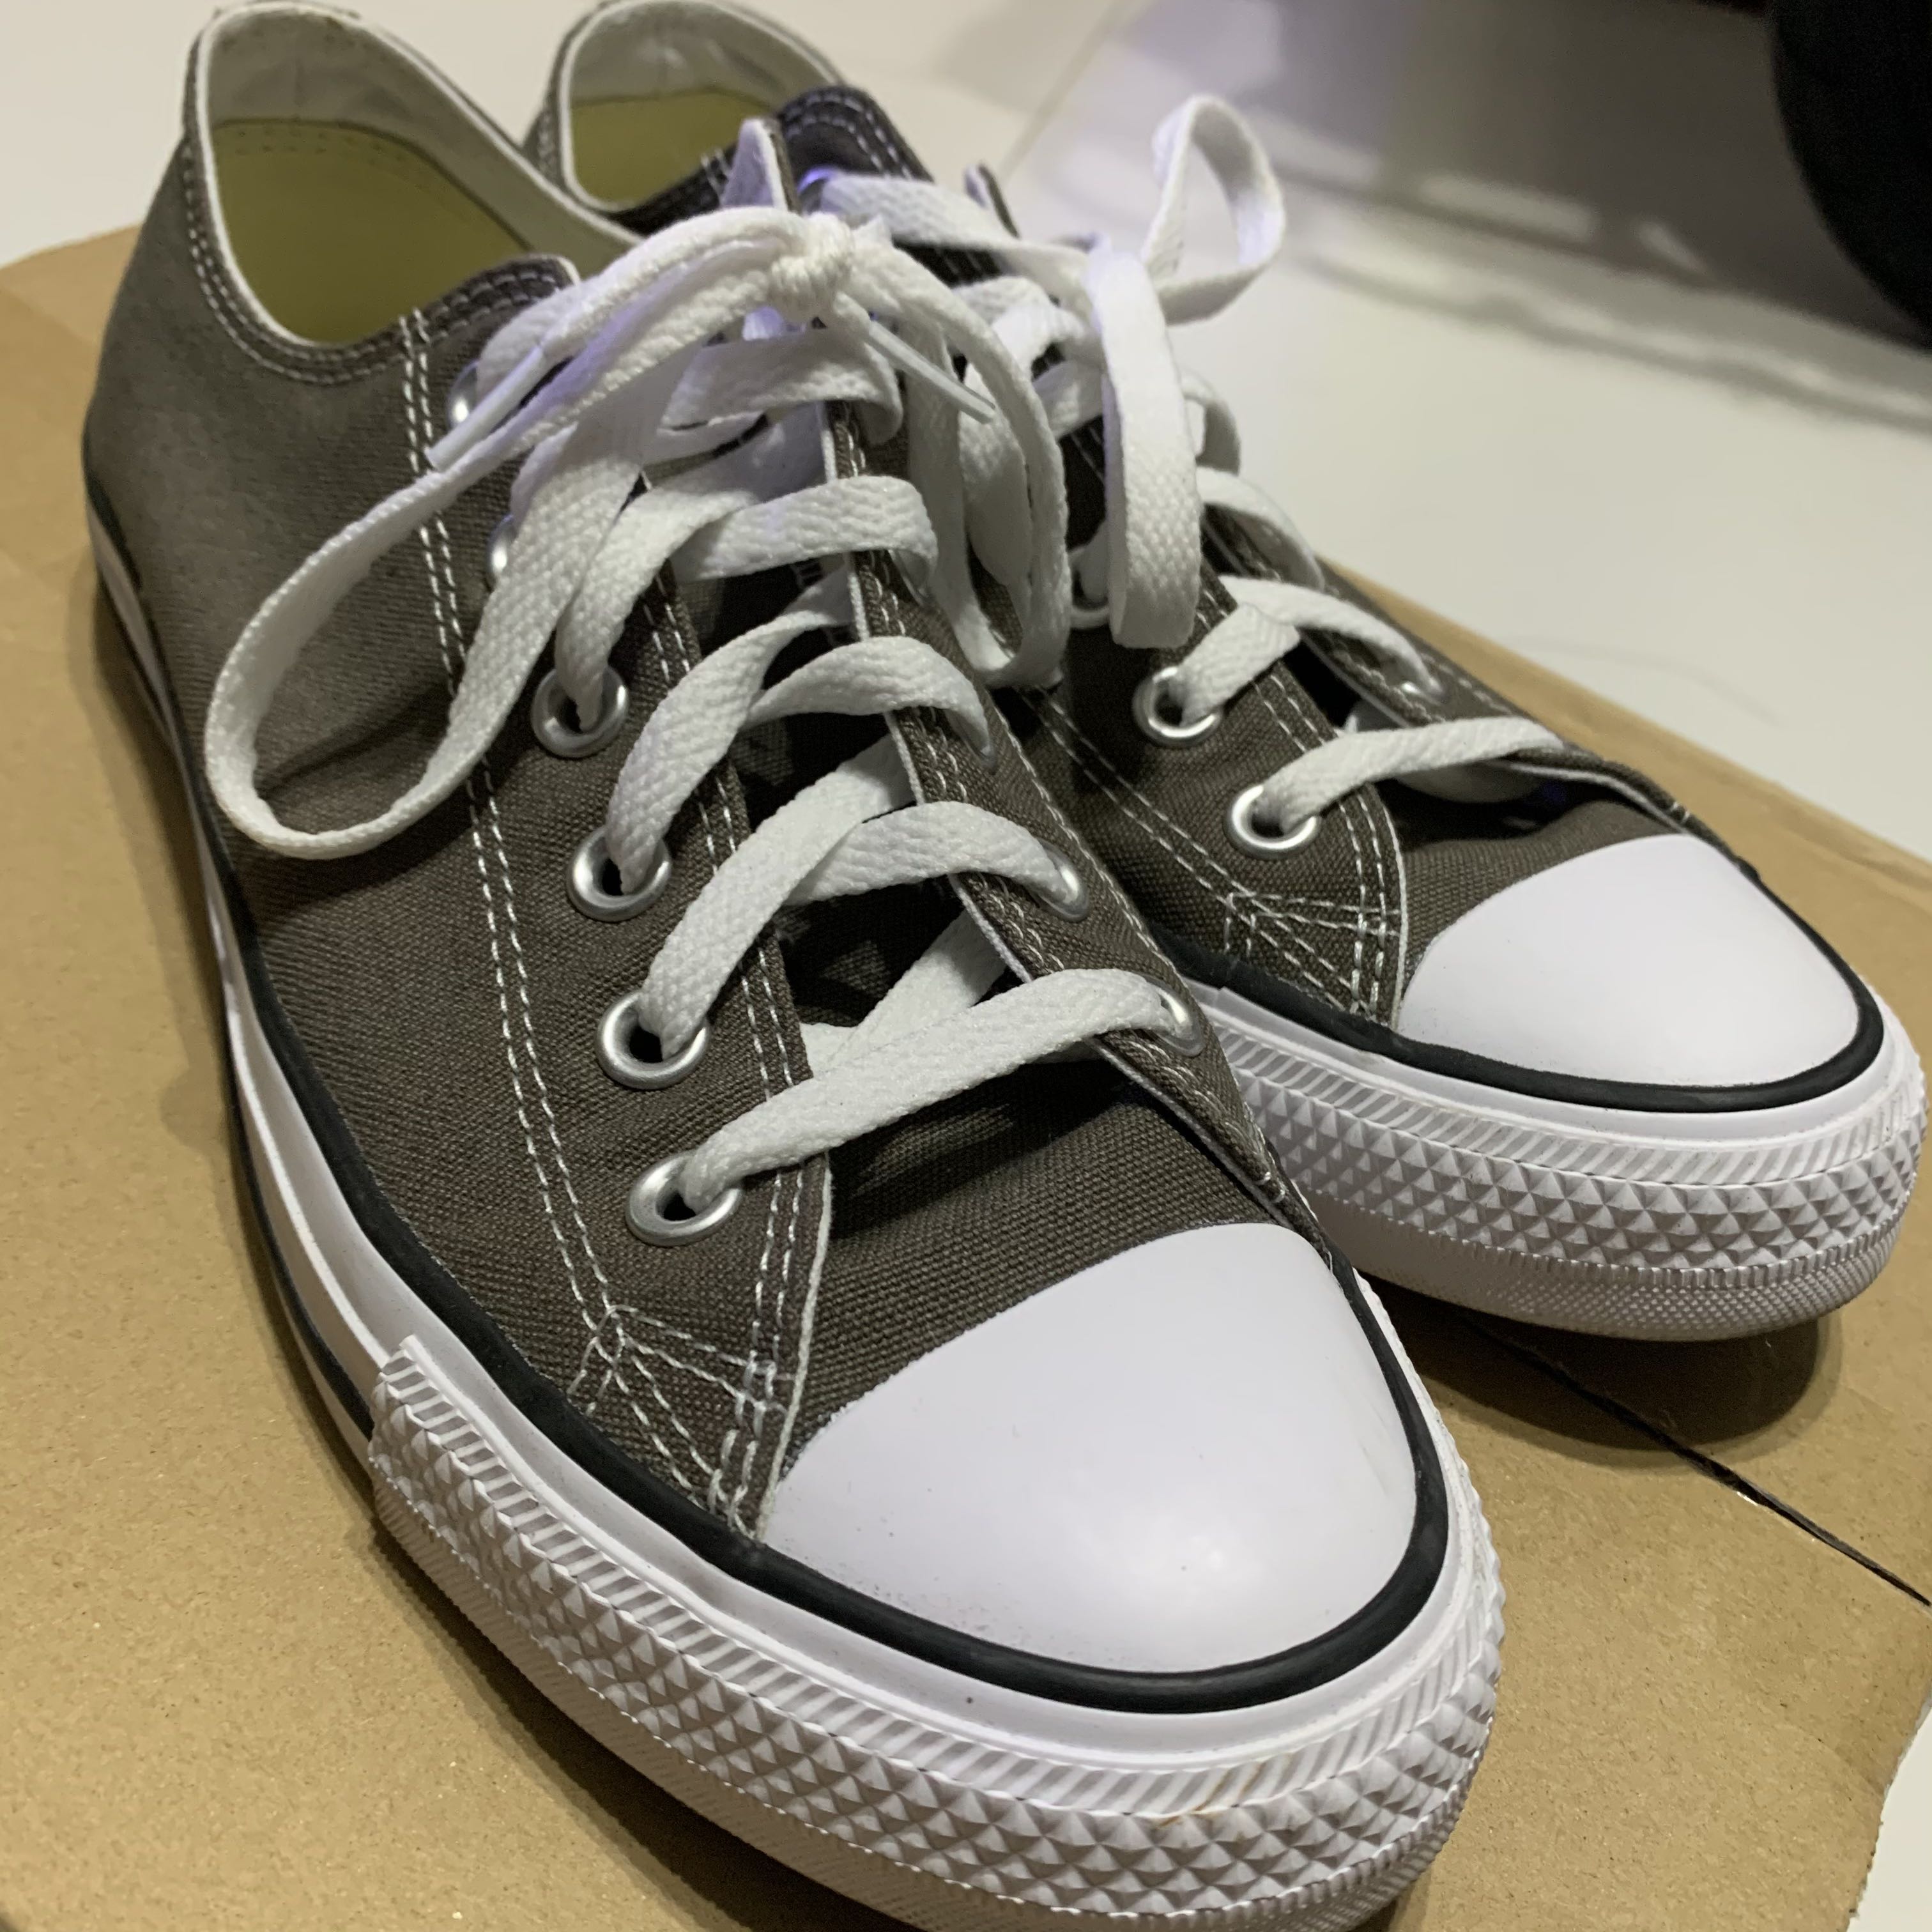 converse all star ox charcoal